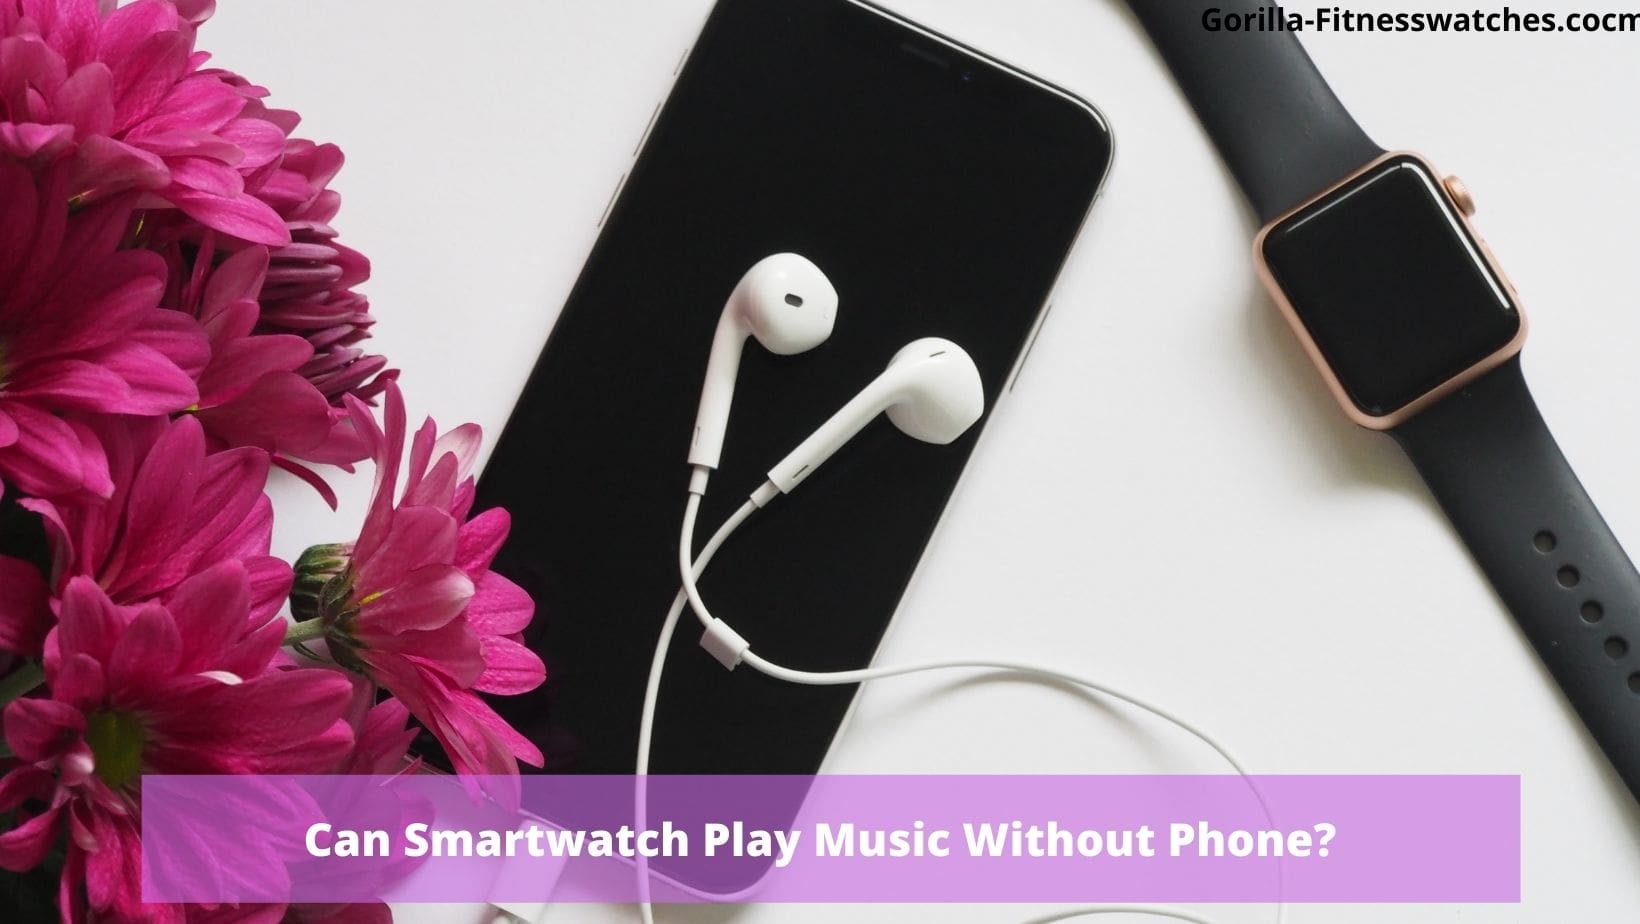 Can Smartwatch Play Music Without Phone?